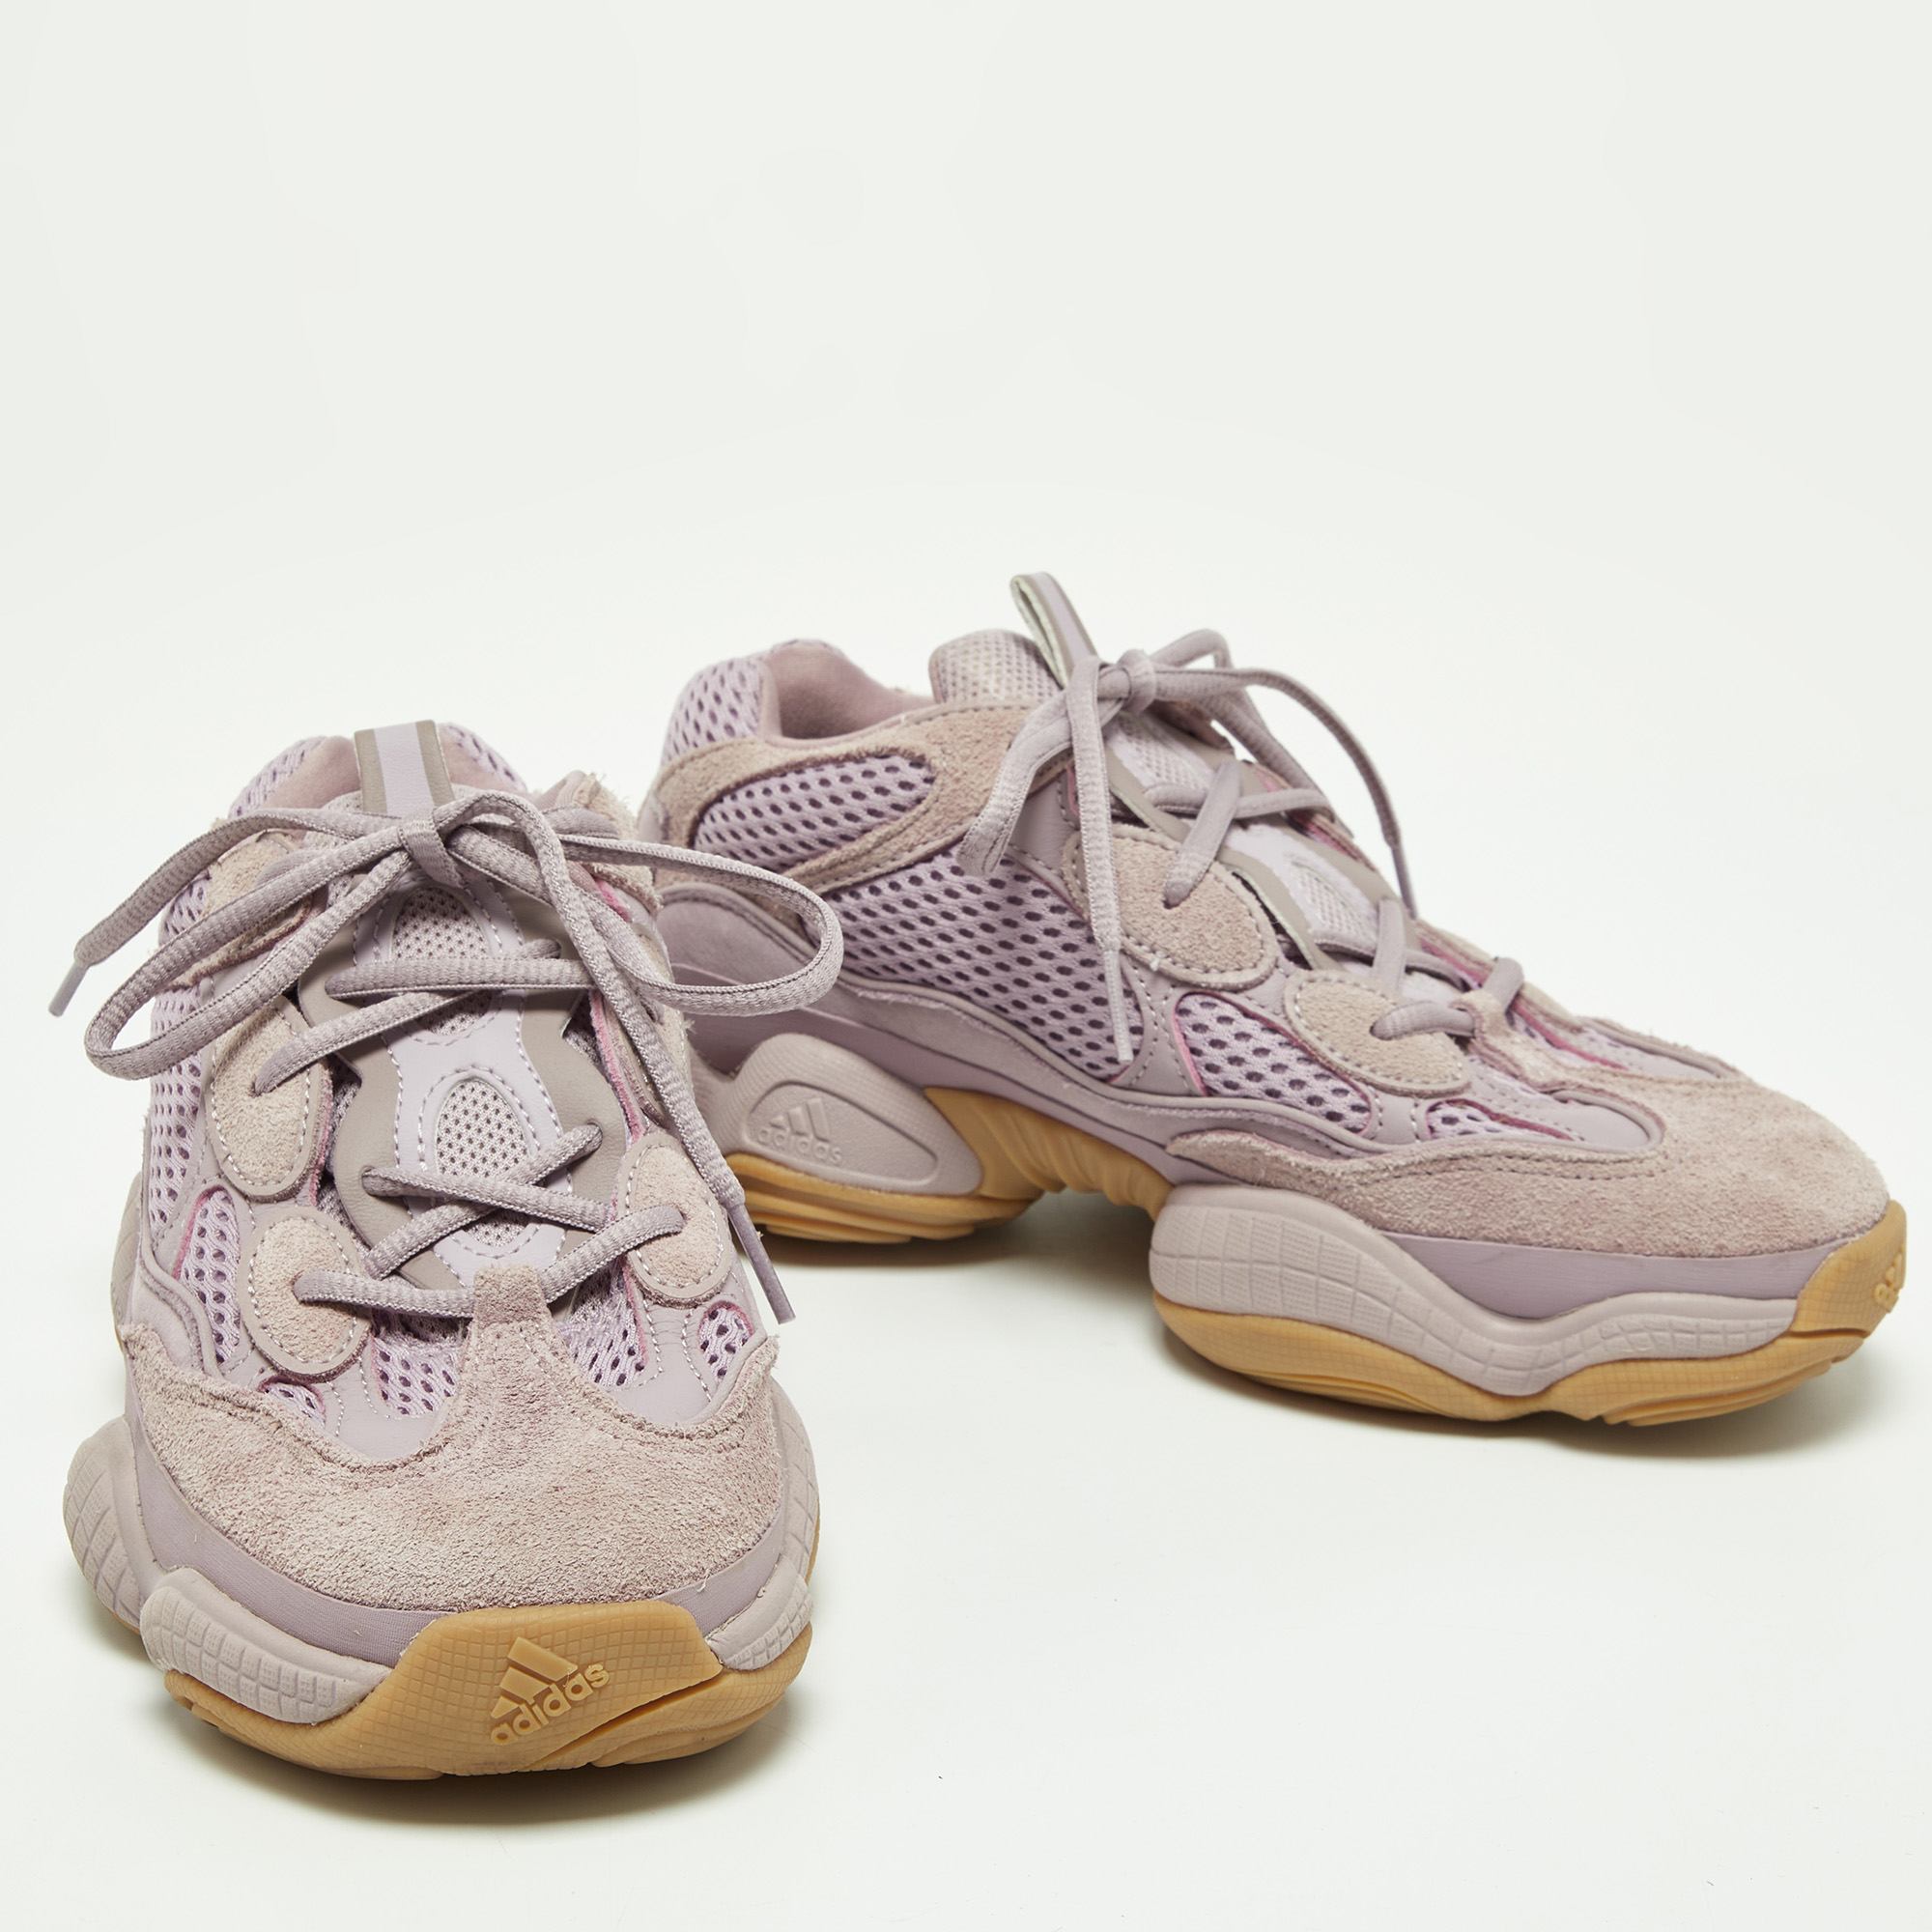 Yeezy X Adidas Purple Suede And Mesh Yeezy 500 Soft Vision Sneakers Size 38